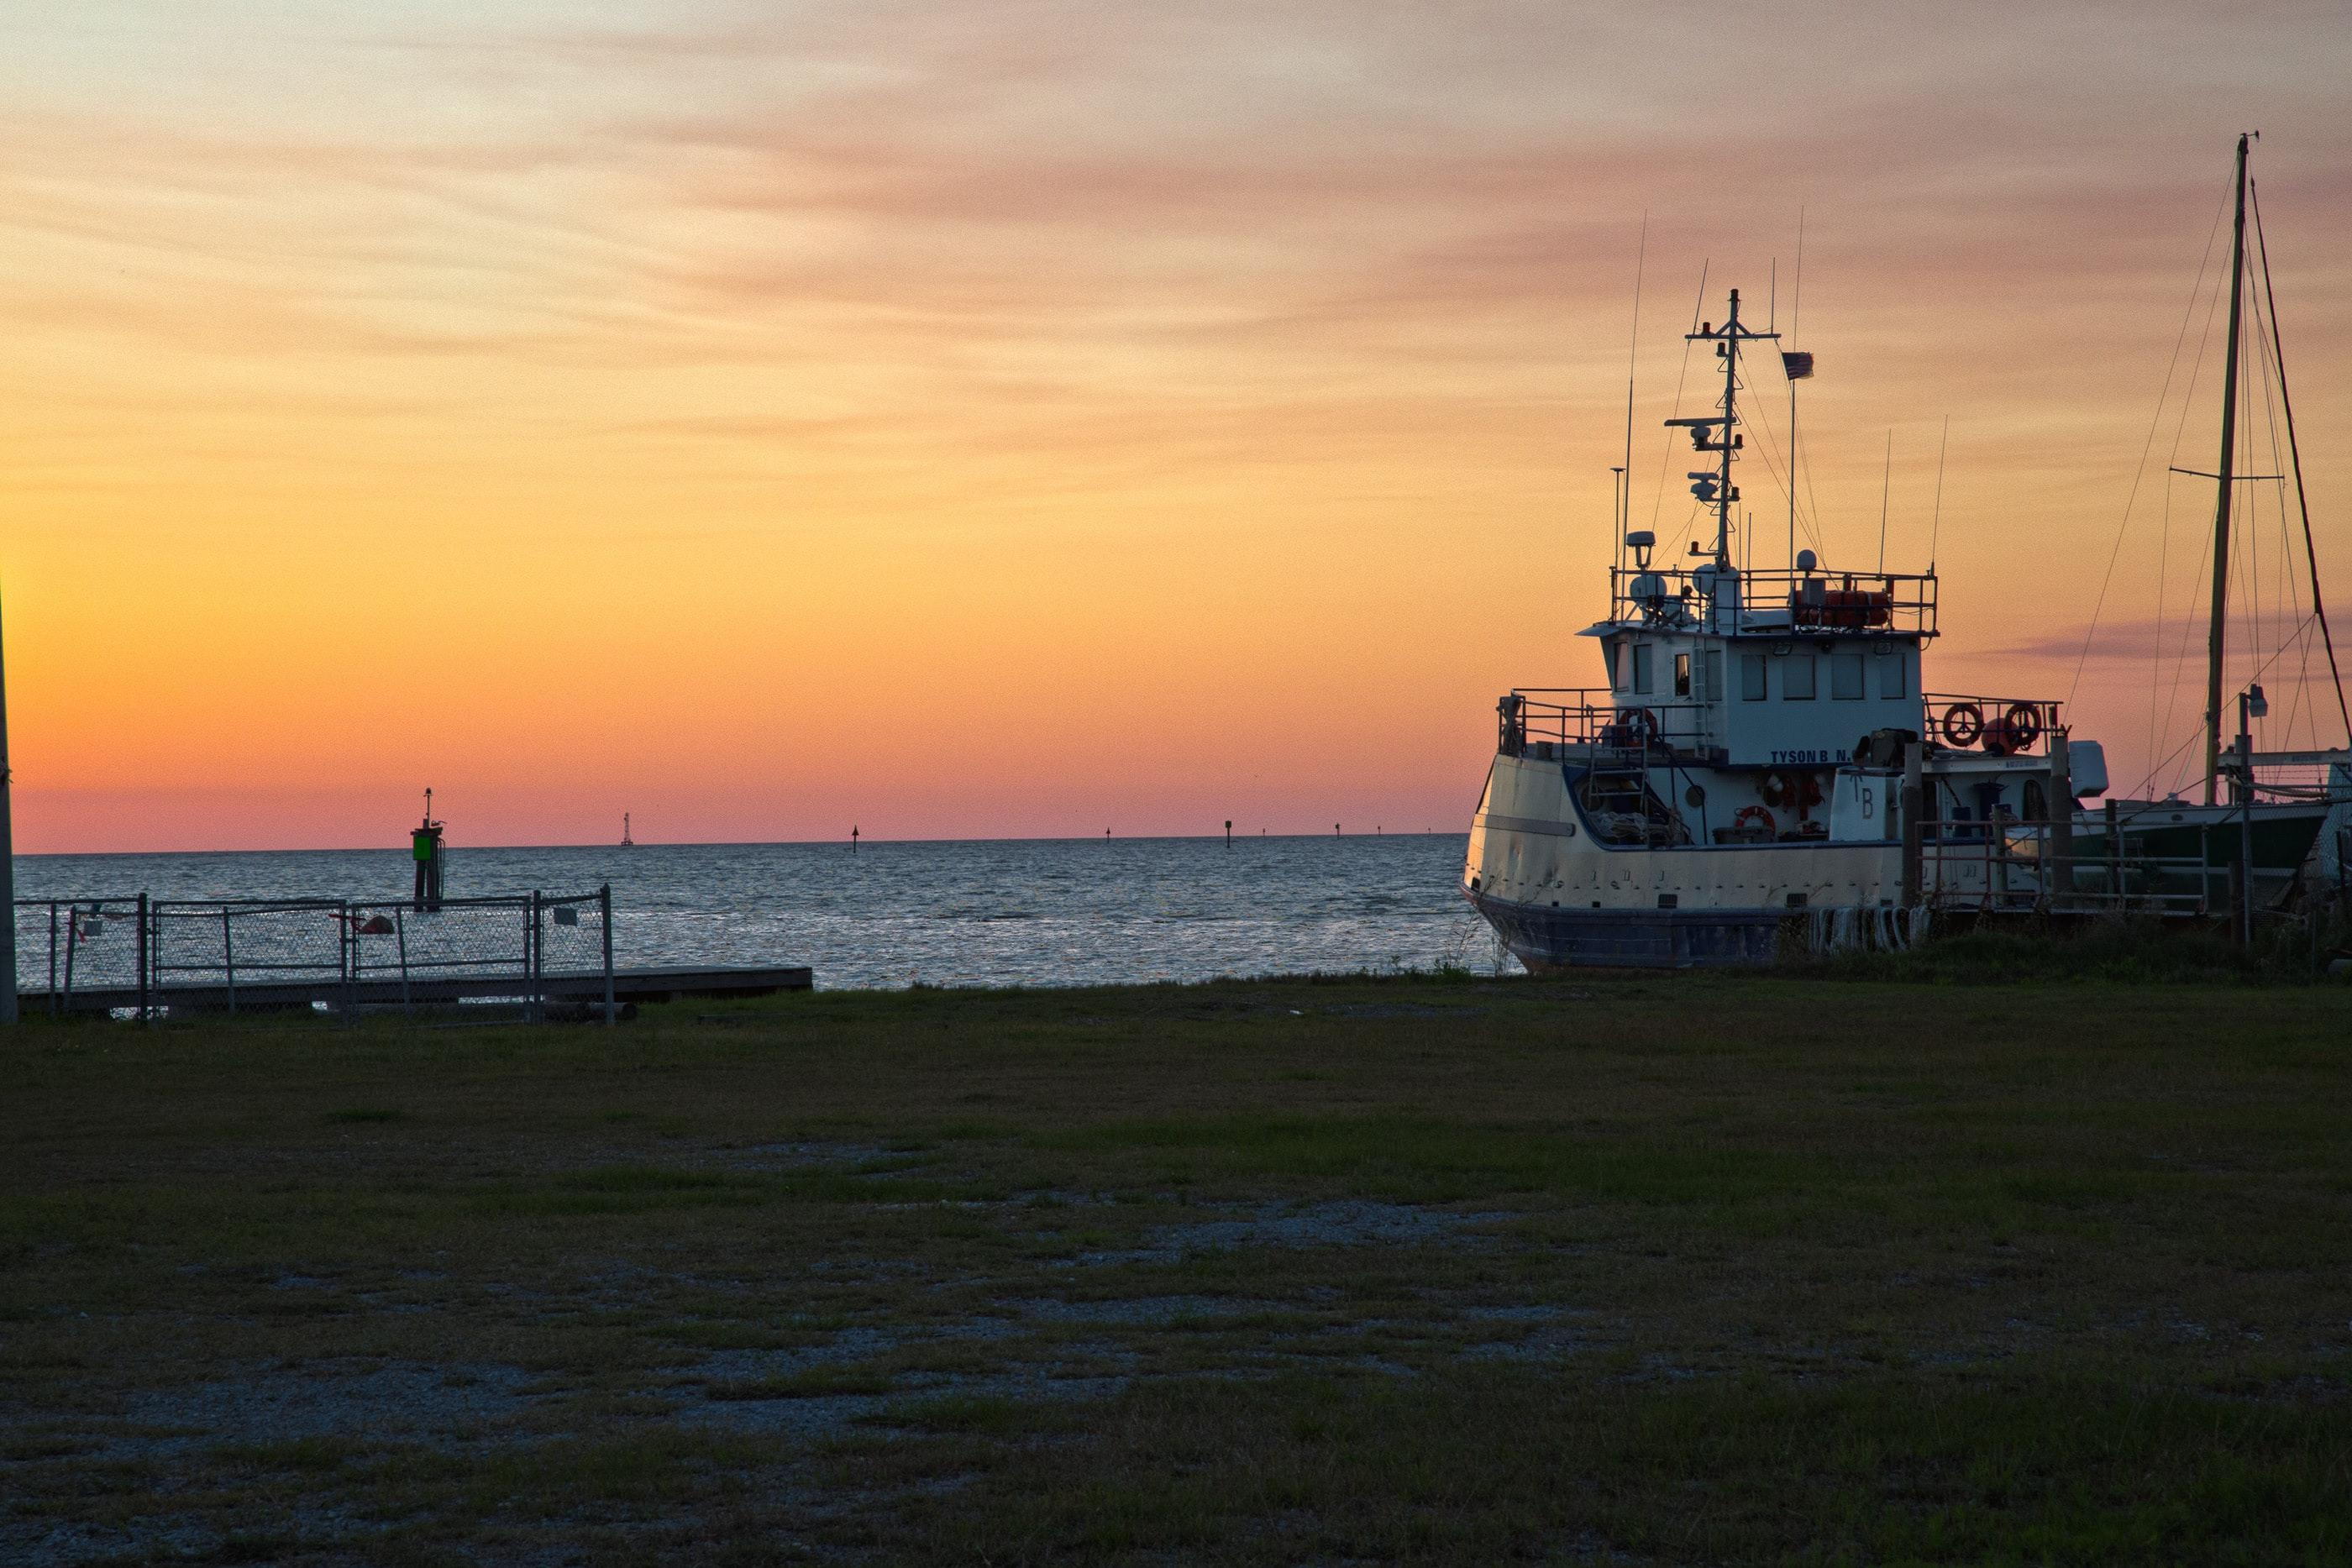 A view of a boat at sunset in Dauphin Island Alabama.